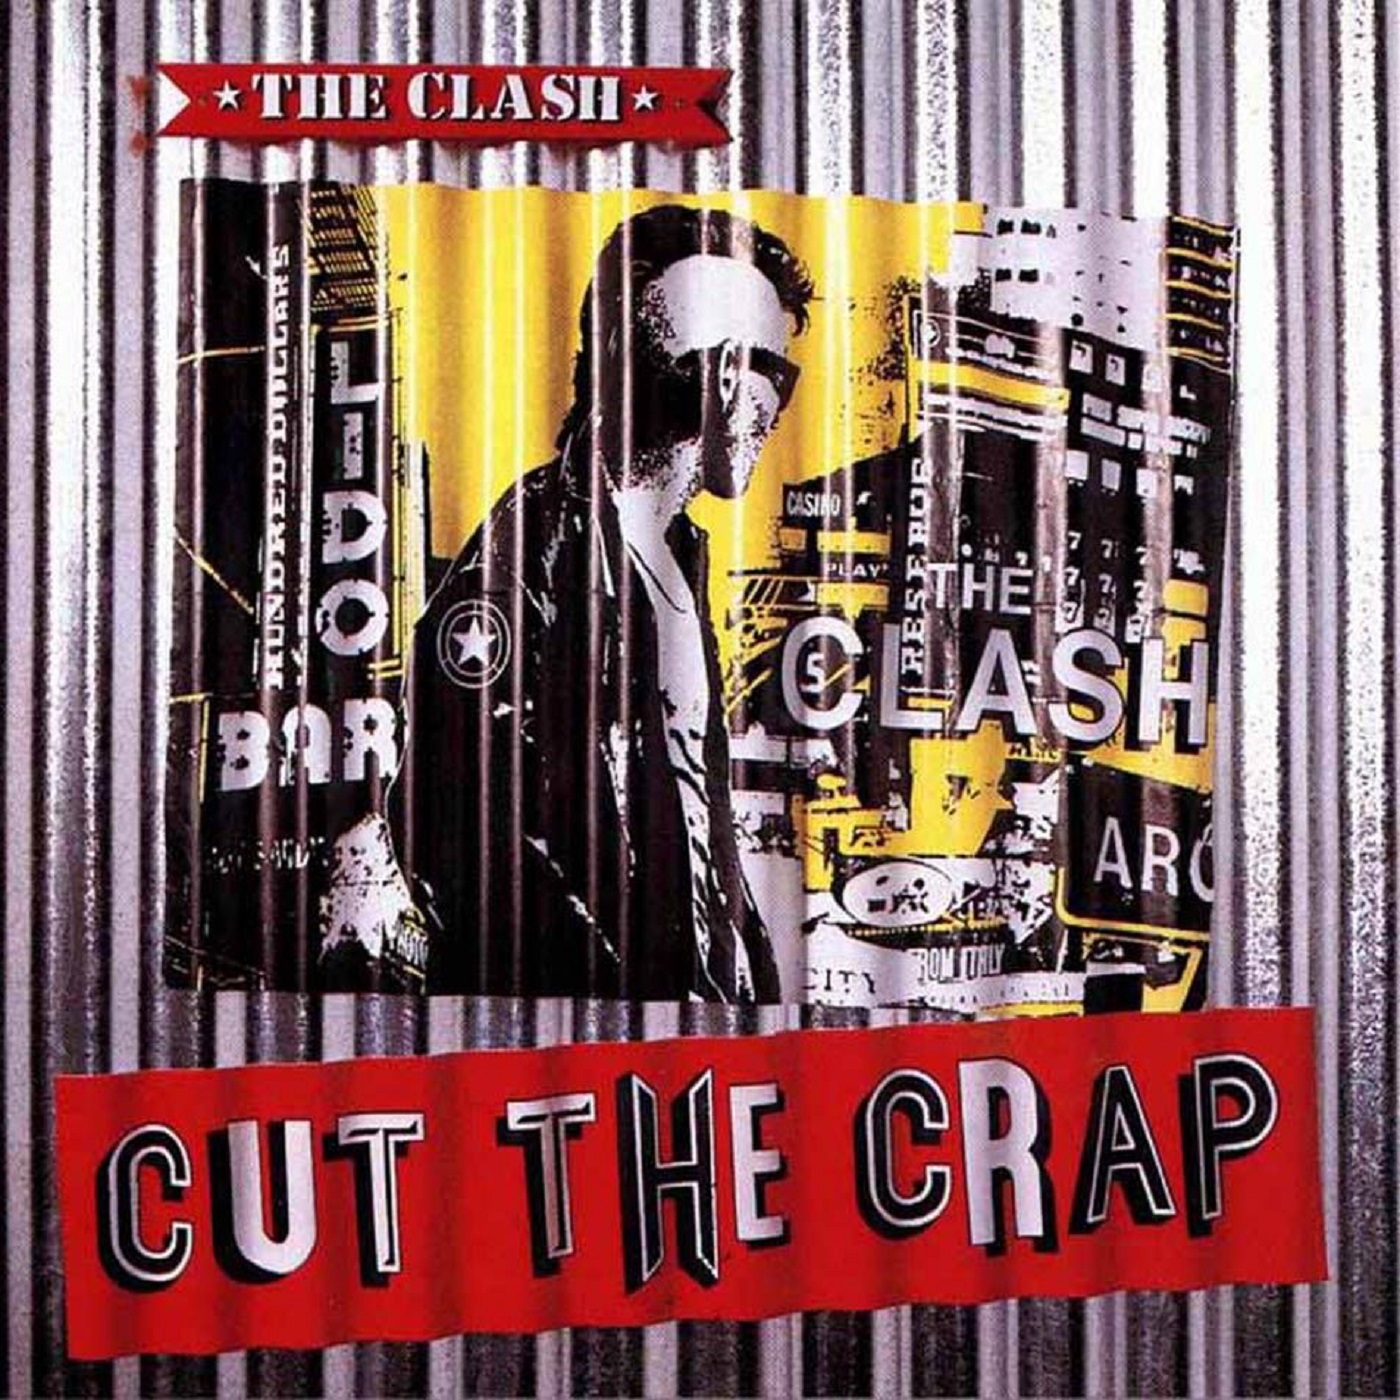 The Clash’s “Cut The Crap” (with Anthony, Katy, and Will)